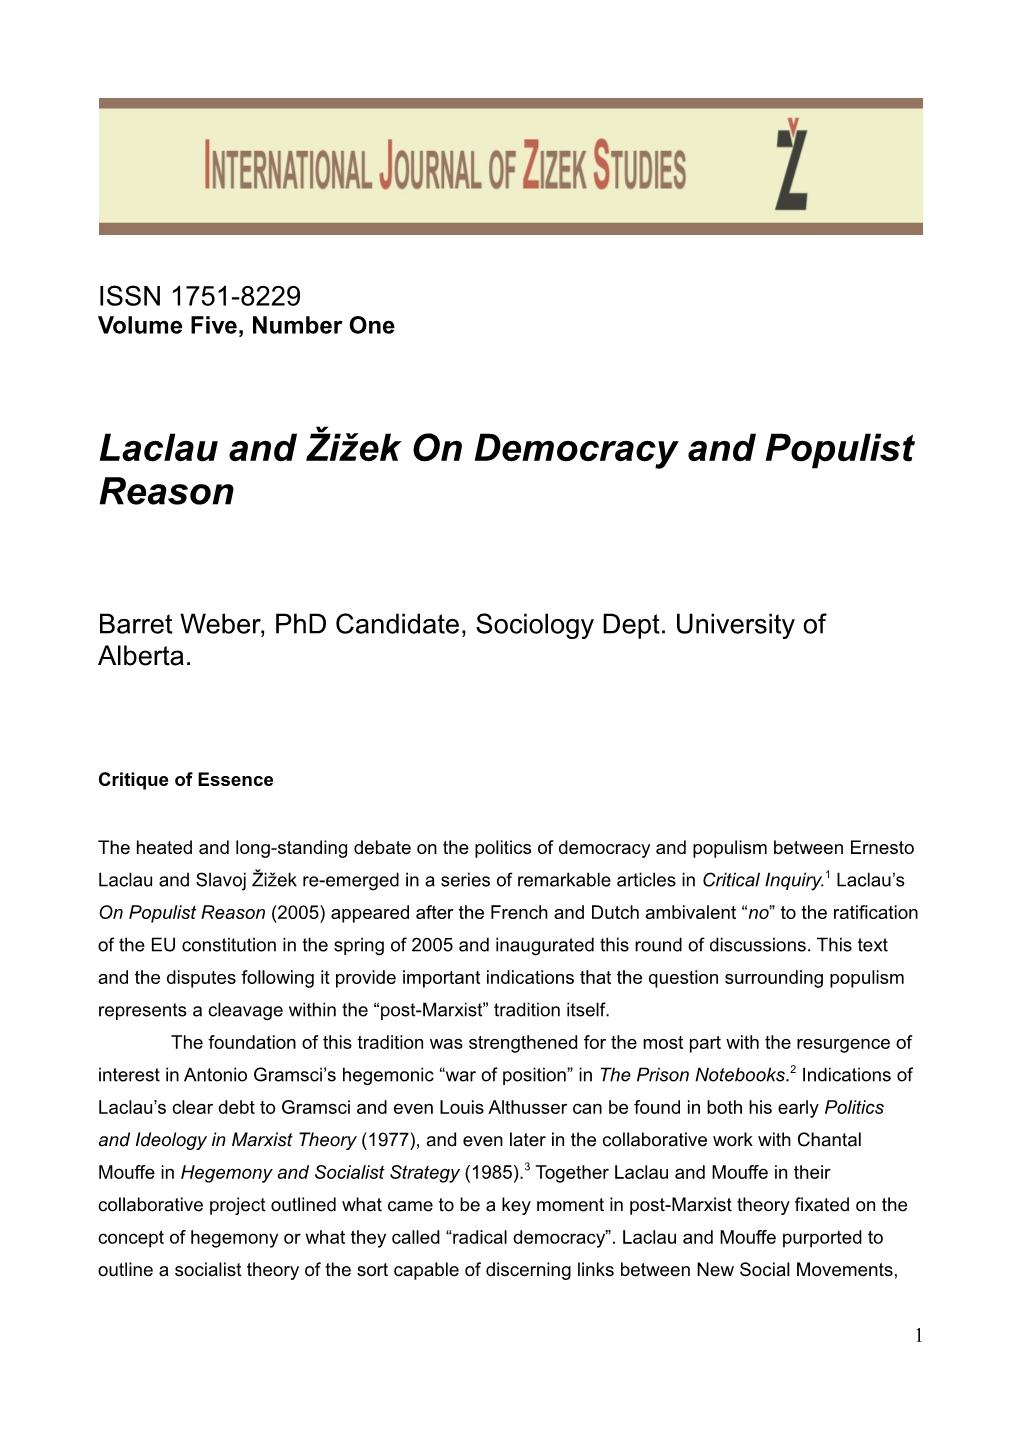 Laclau and Žižek on Democracy and Populist Reason